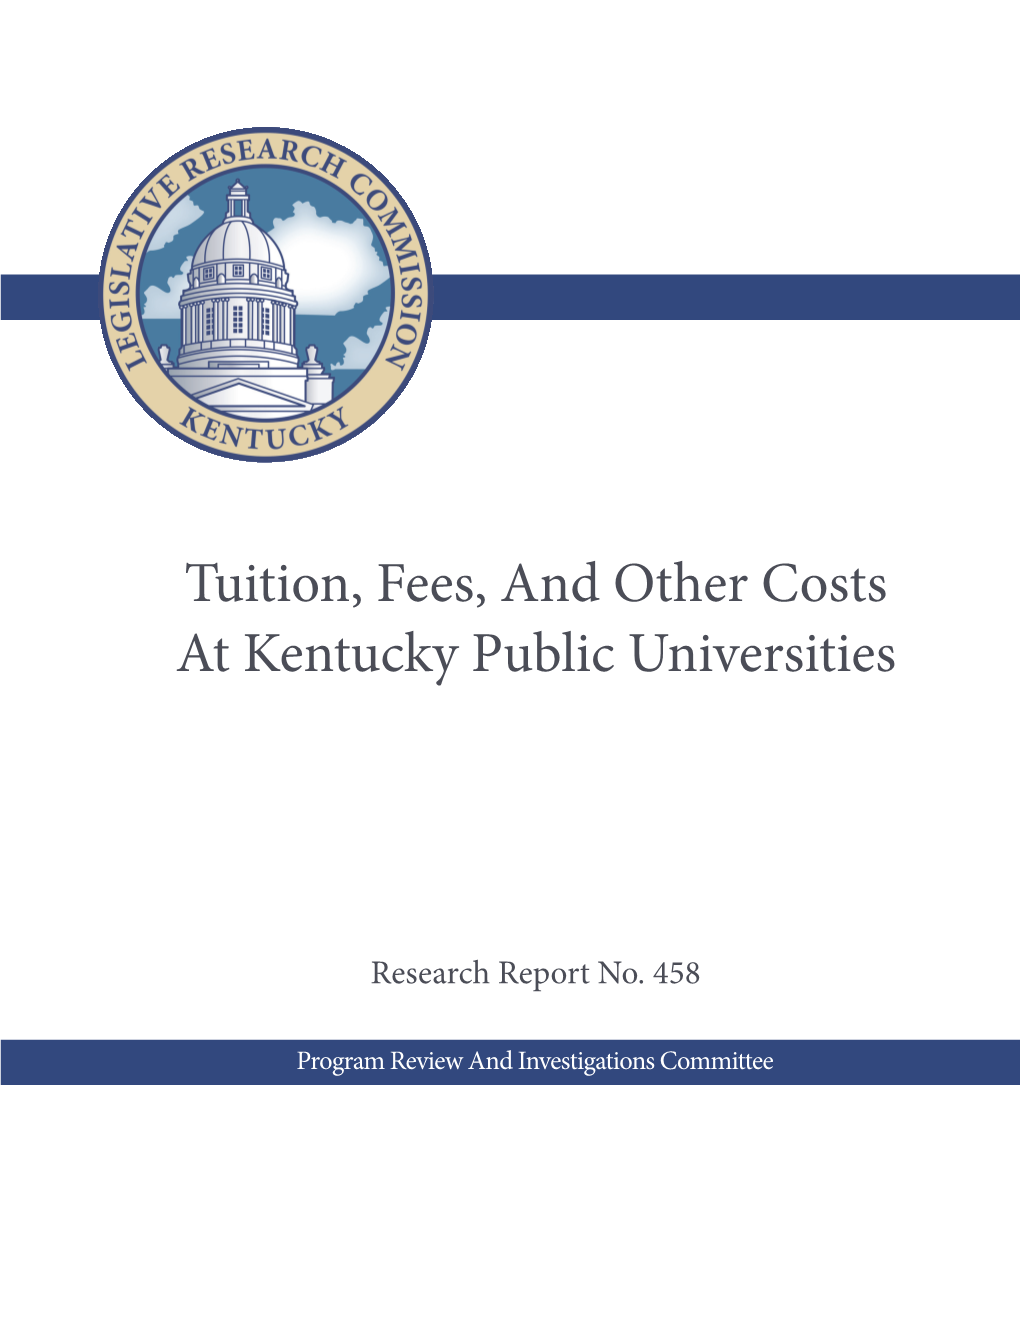 Tuition, Fees, and Other Costs at Kentucky Public Universities